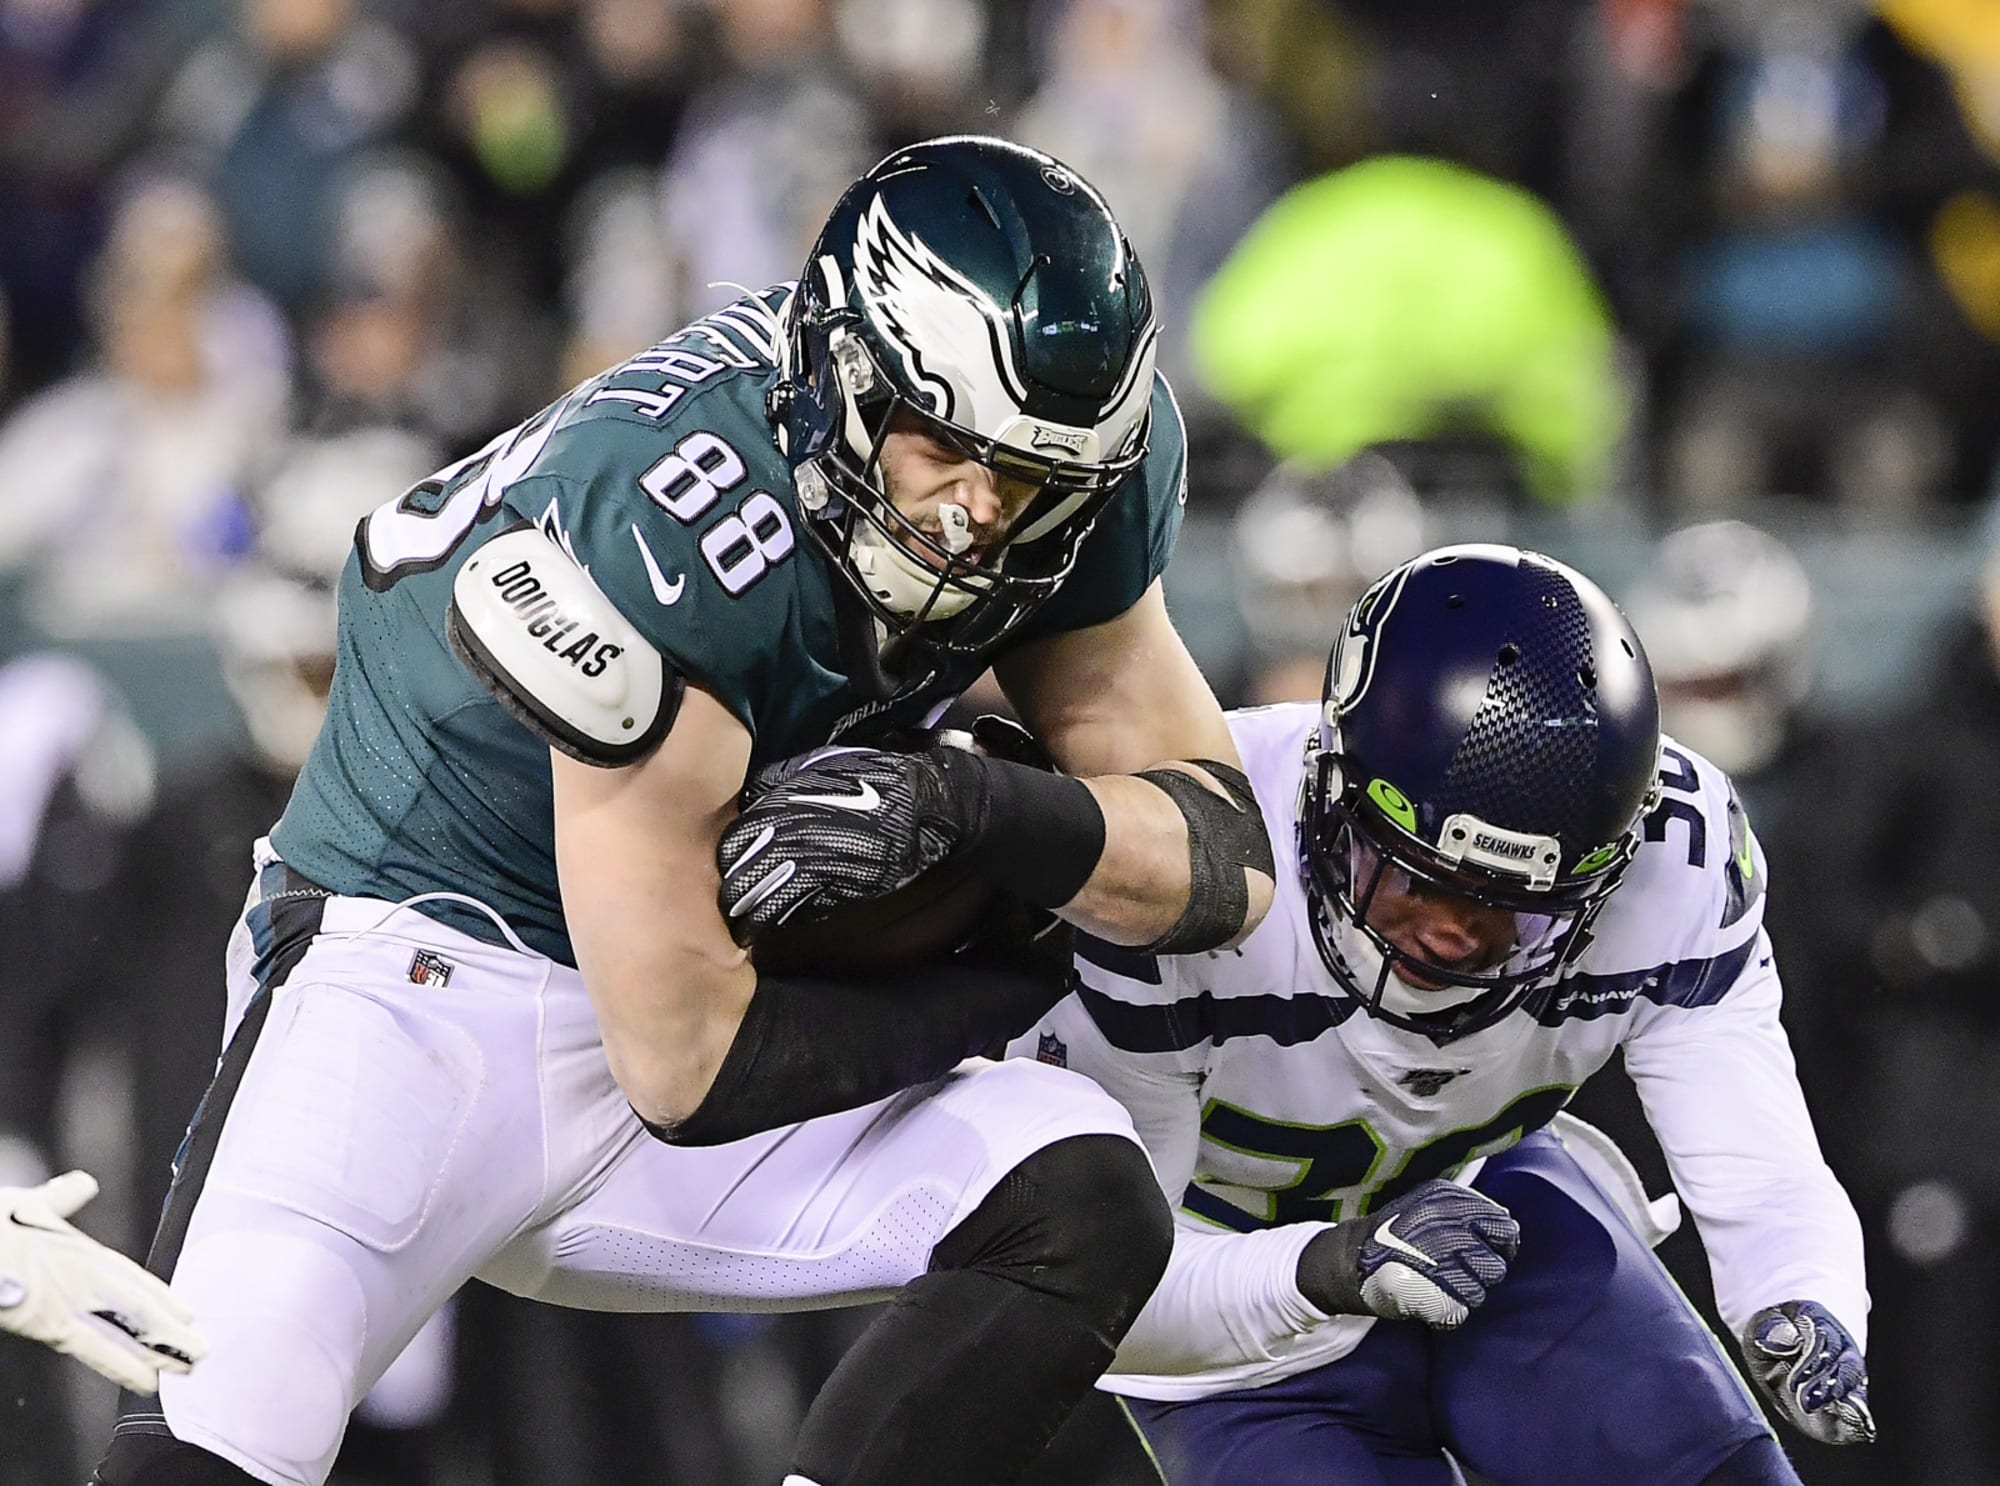 Nfl Writer Needs To Familiarize Himself With This Philadelphia Eagles Roster